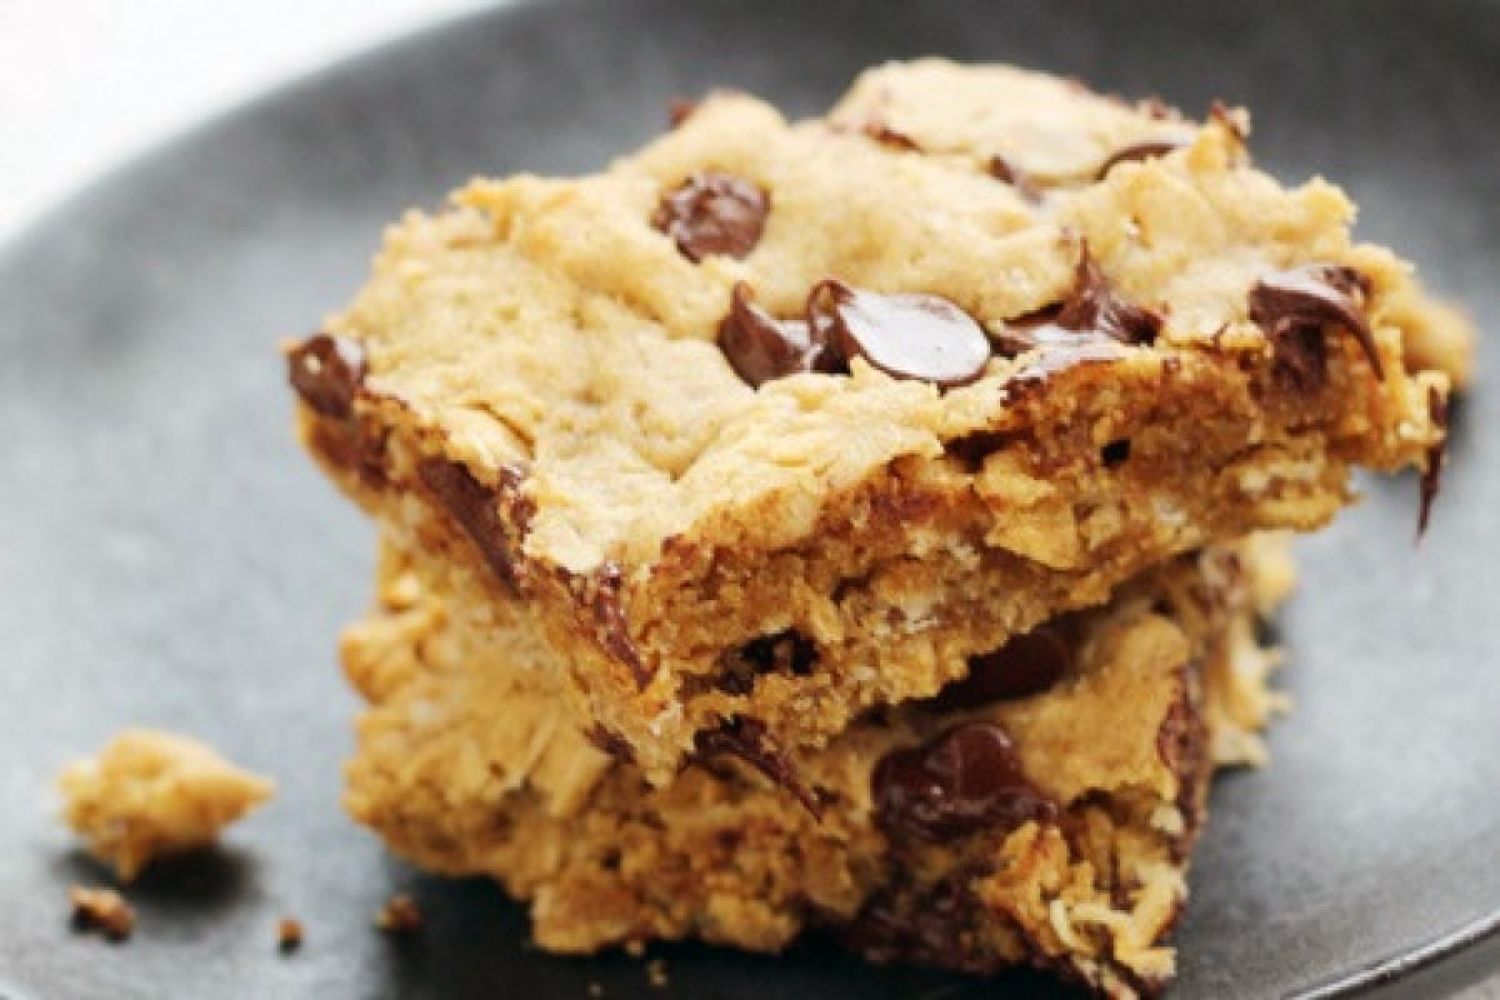 Peanut Butter chocolate chip oatmeal bars with whole grain oats on a plate.